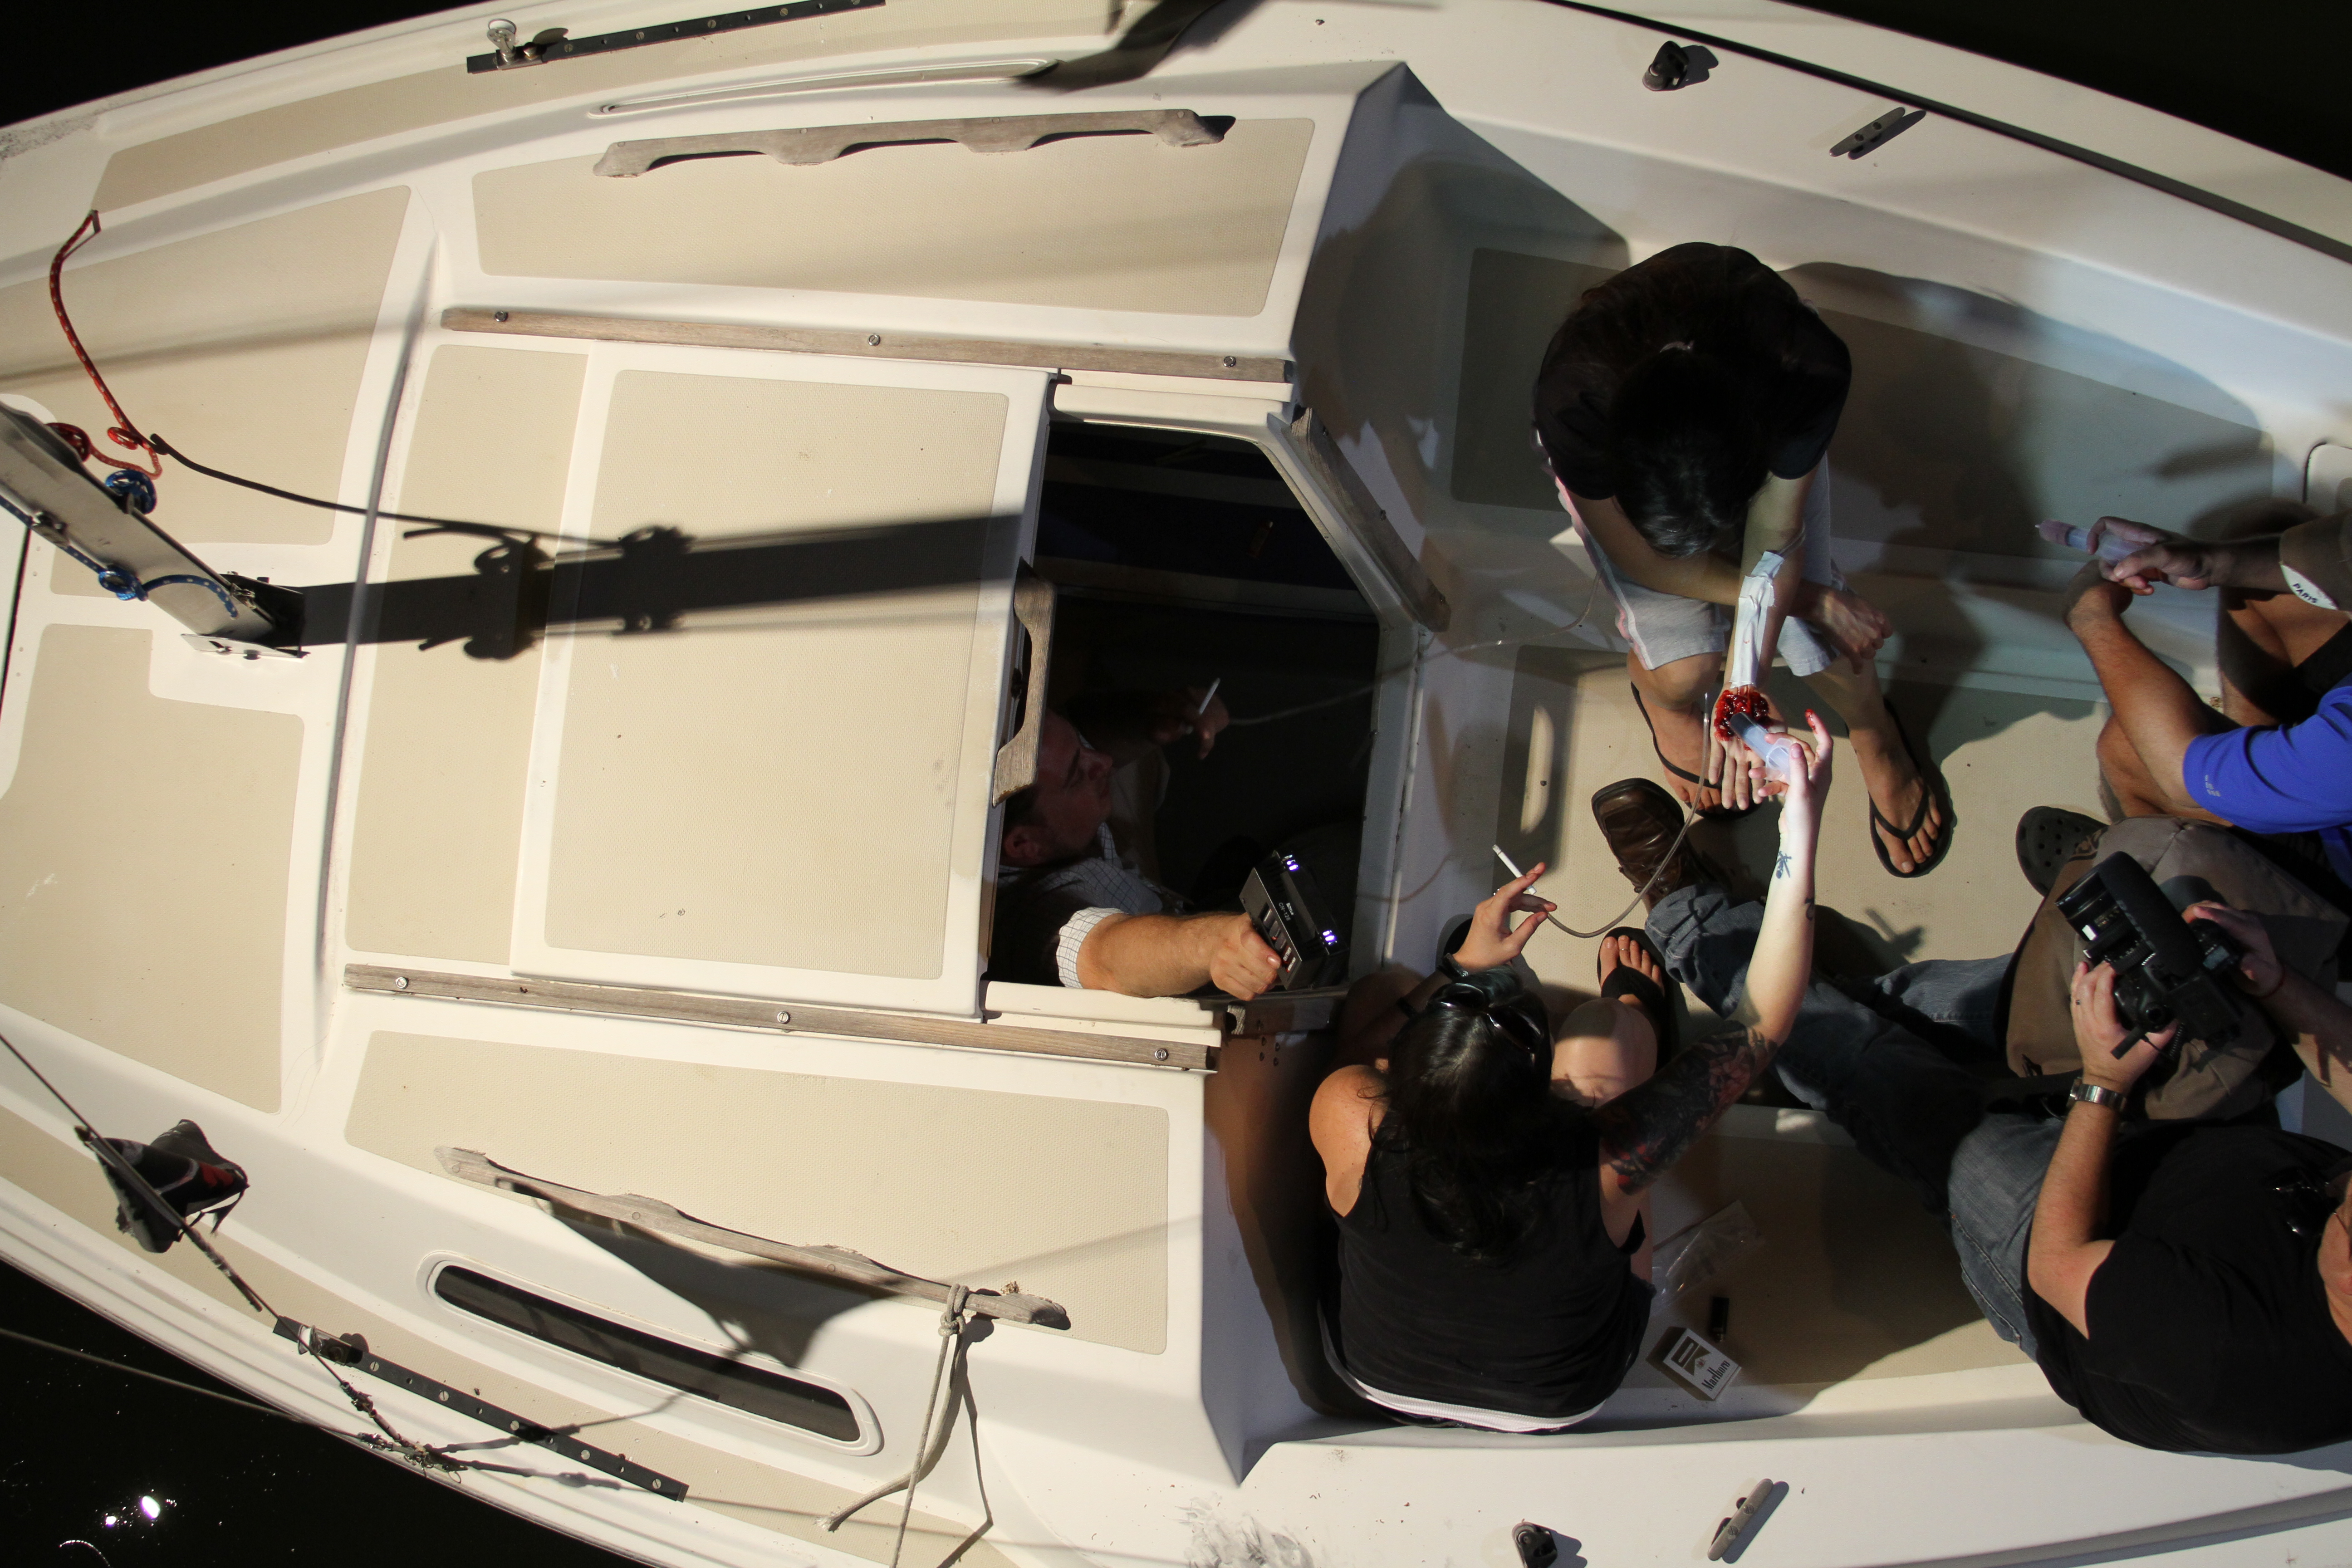 After planes, and snakes, and owls, we wrapped a LONG day during Splatterfest contest weekend filming in the boat.